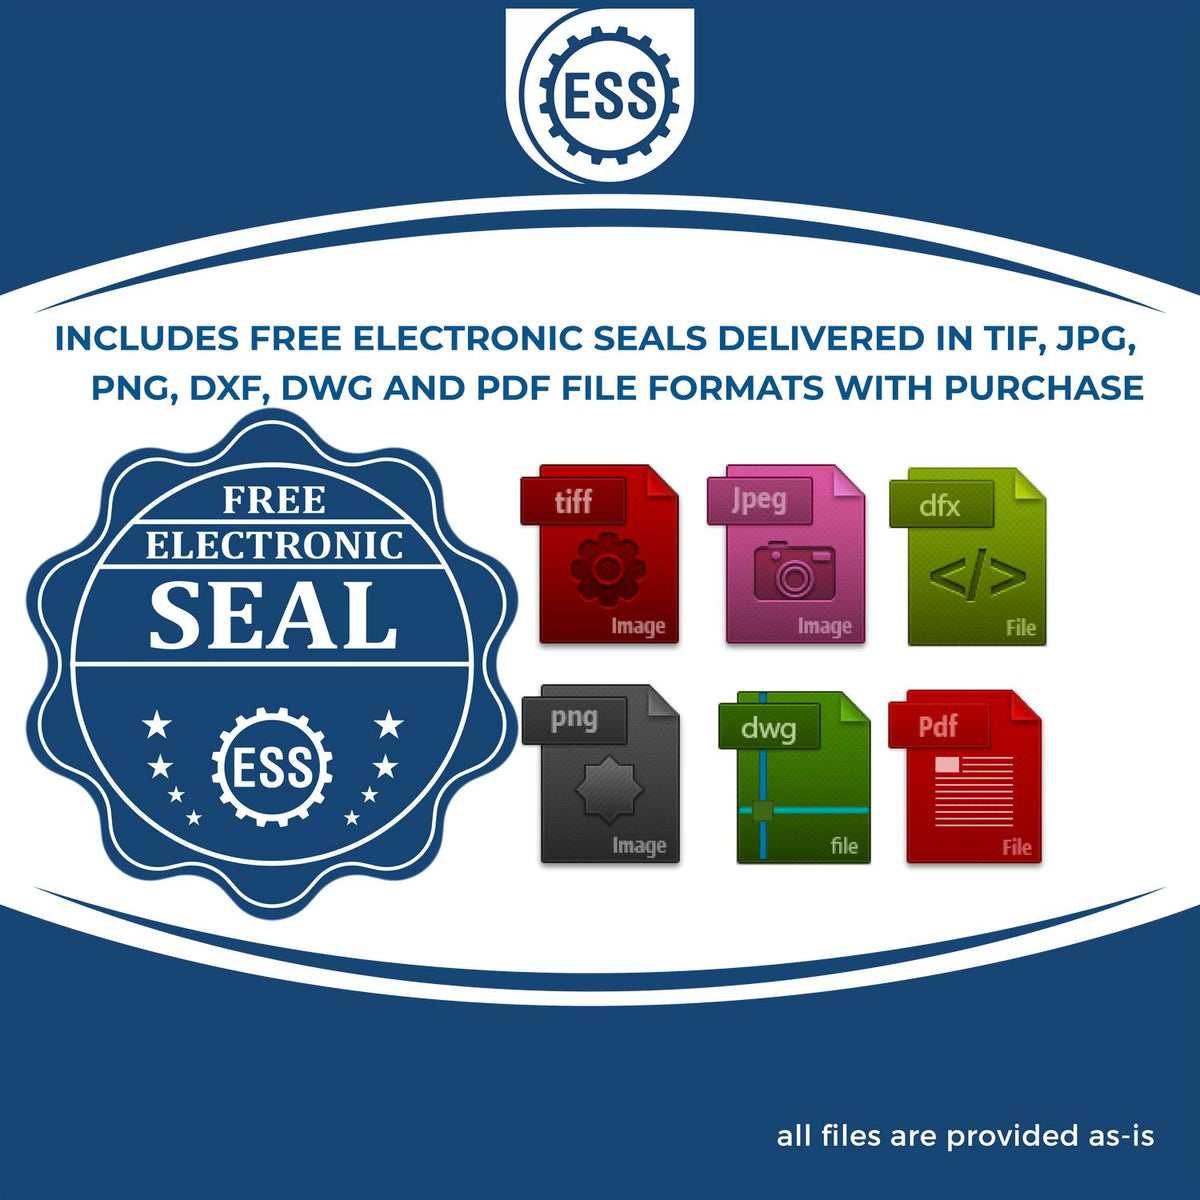 An infographic for the free electronic seal for the State of Iowa Extended Long Reach Geologist Seal illustrating the different file type icons such as DXF, DWG, TIF, JPG and PNG.